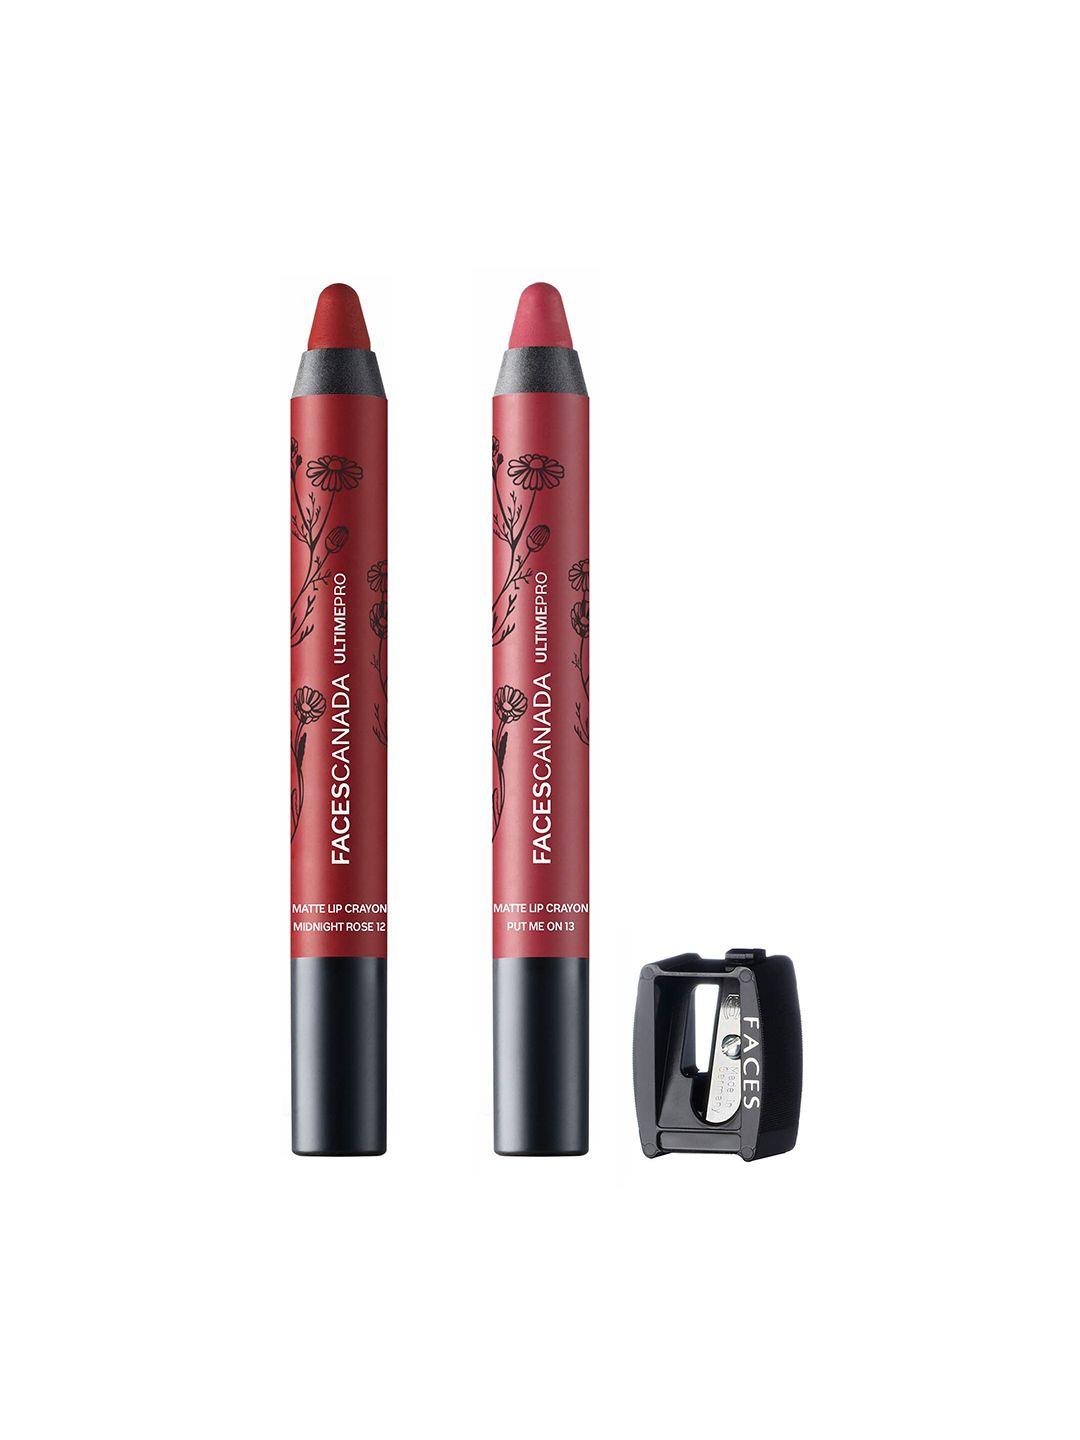 faces canada set of 2 lip crayon midnight rose & put me on